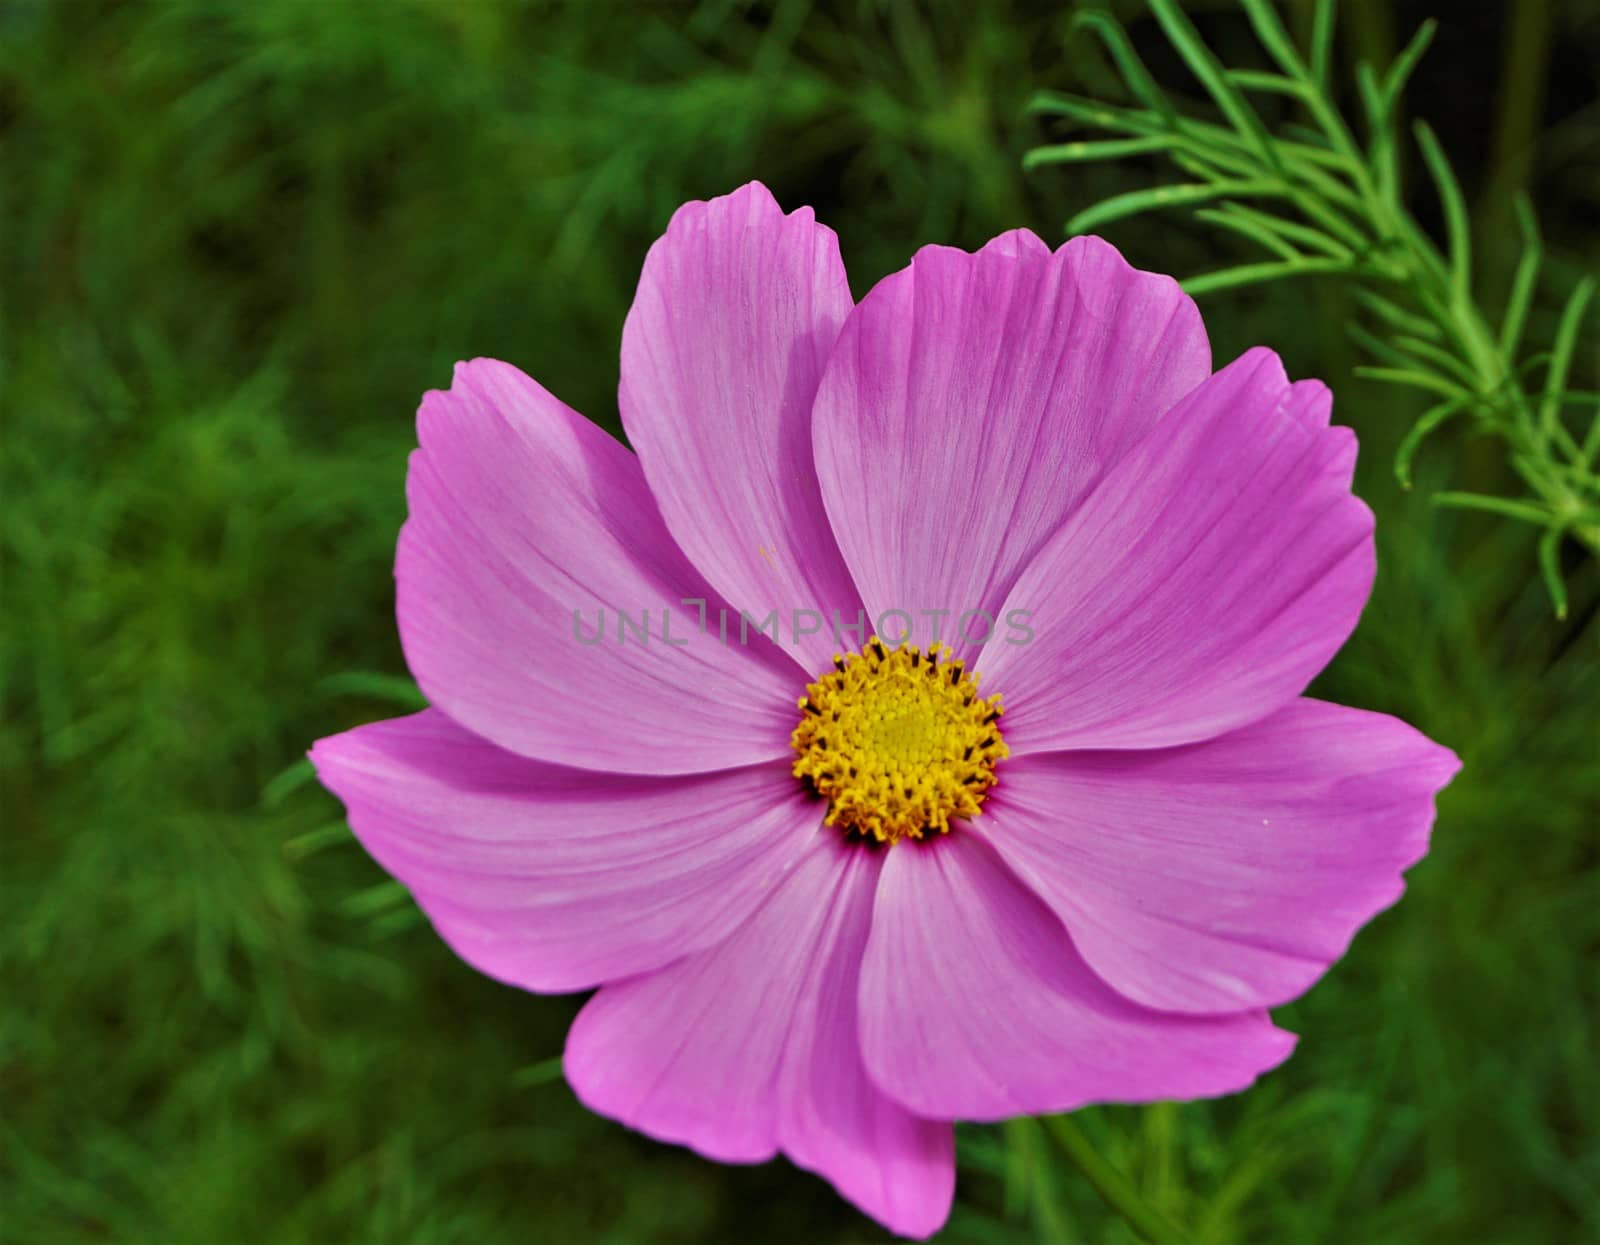 Pink blossom of the garden cosmos Cosmos bipinnatus with yellow florets by pisces2386